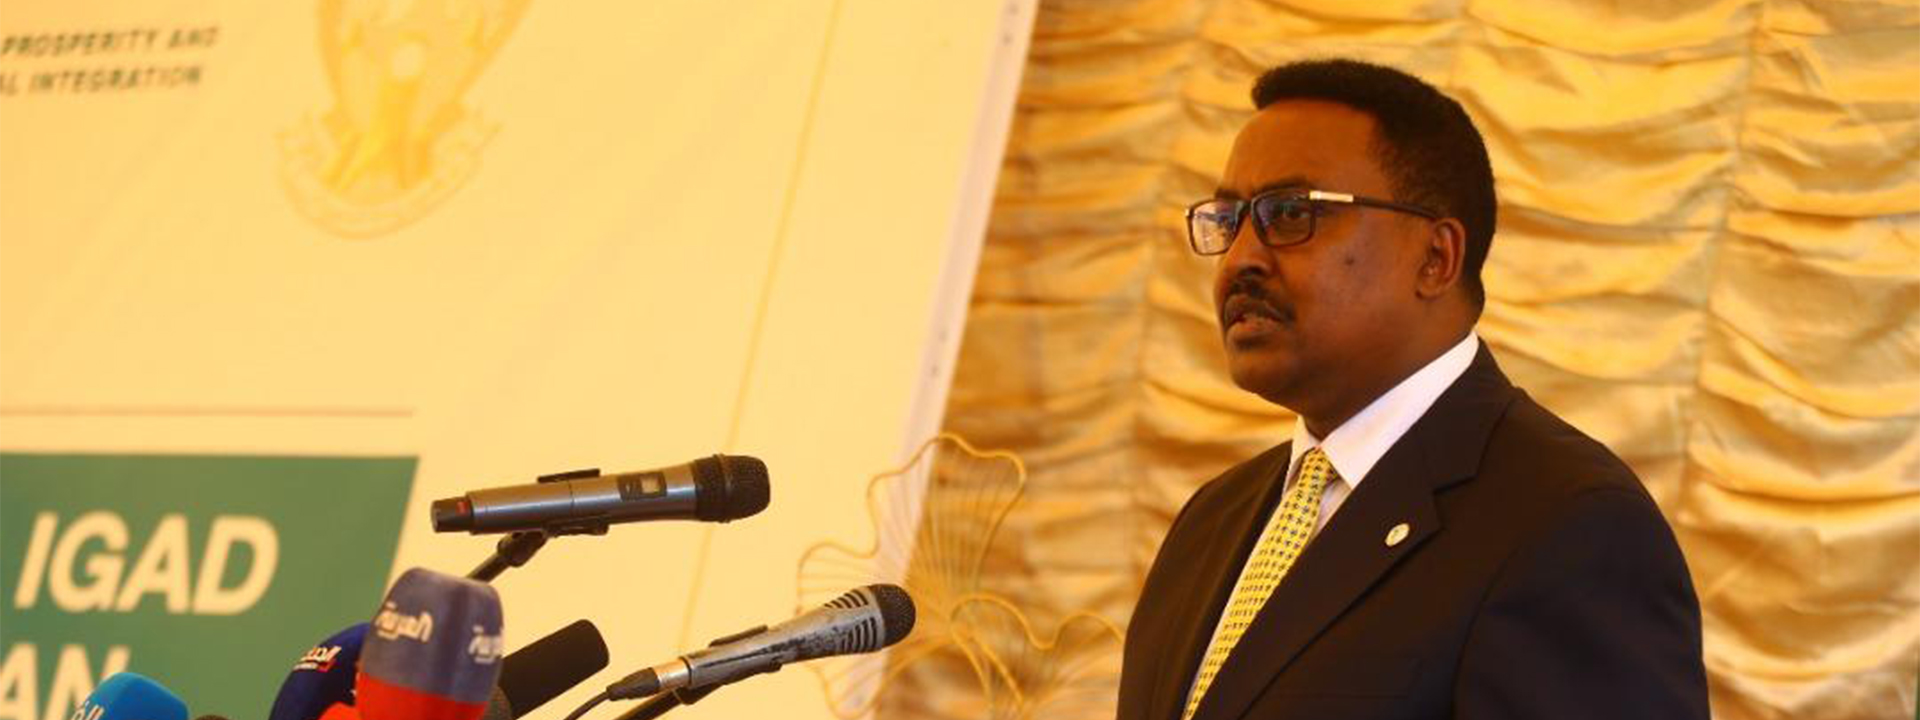 Official Remarks Workneh Gebeyehu, IGAD Executive Secretary Inauguration of the IGAD Sub-Regional Centre and Ground-Breaking of Donated Land Khartoum, Republic of Sudan Saturday 17th September 2022